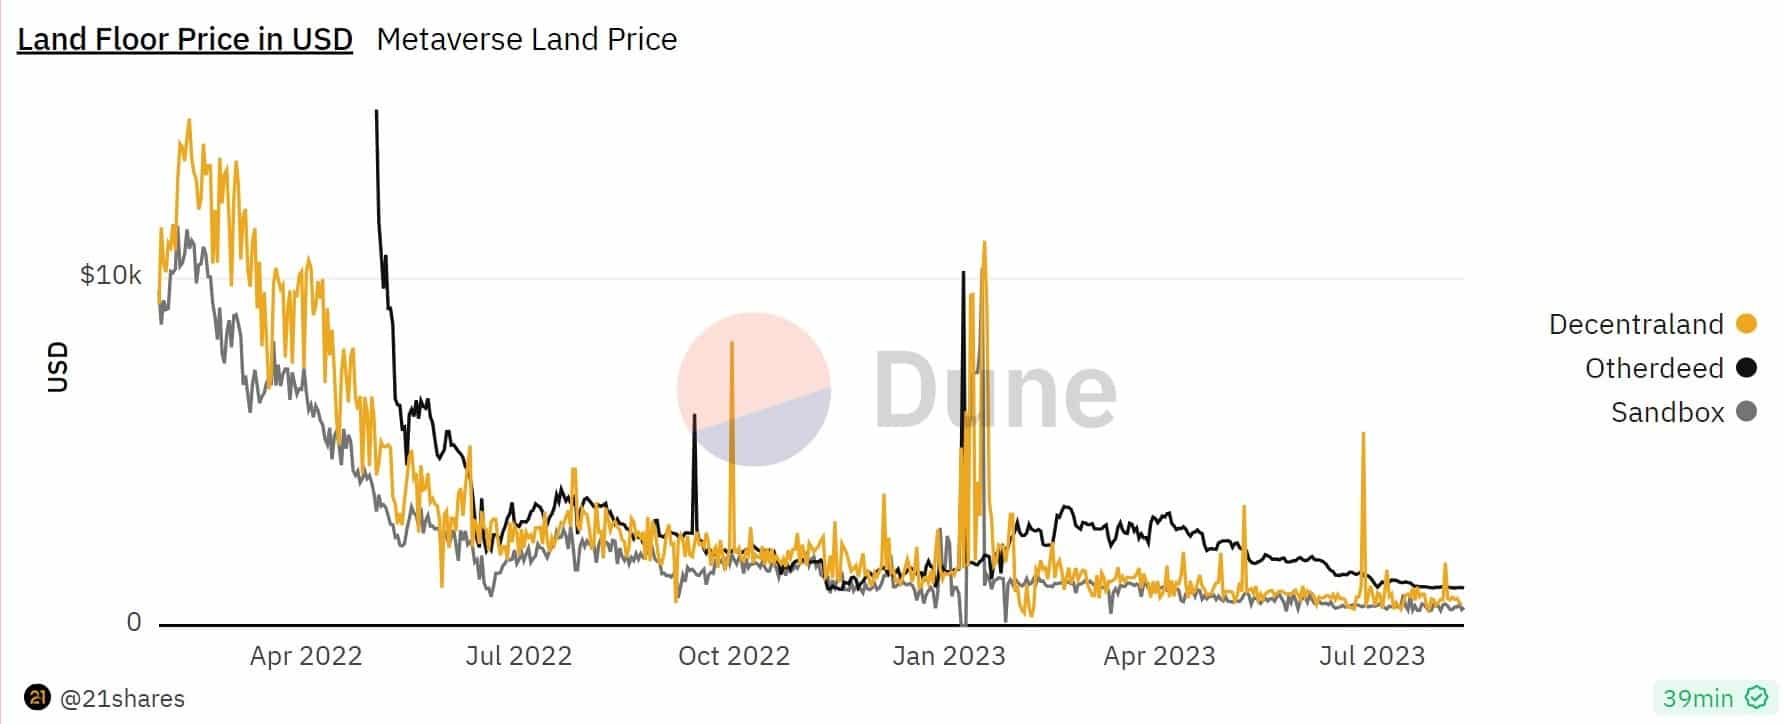 Figure 2 - Floors price of The Sandbox, Decentraland and Otherdeed lands